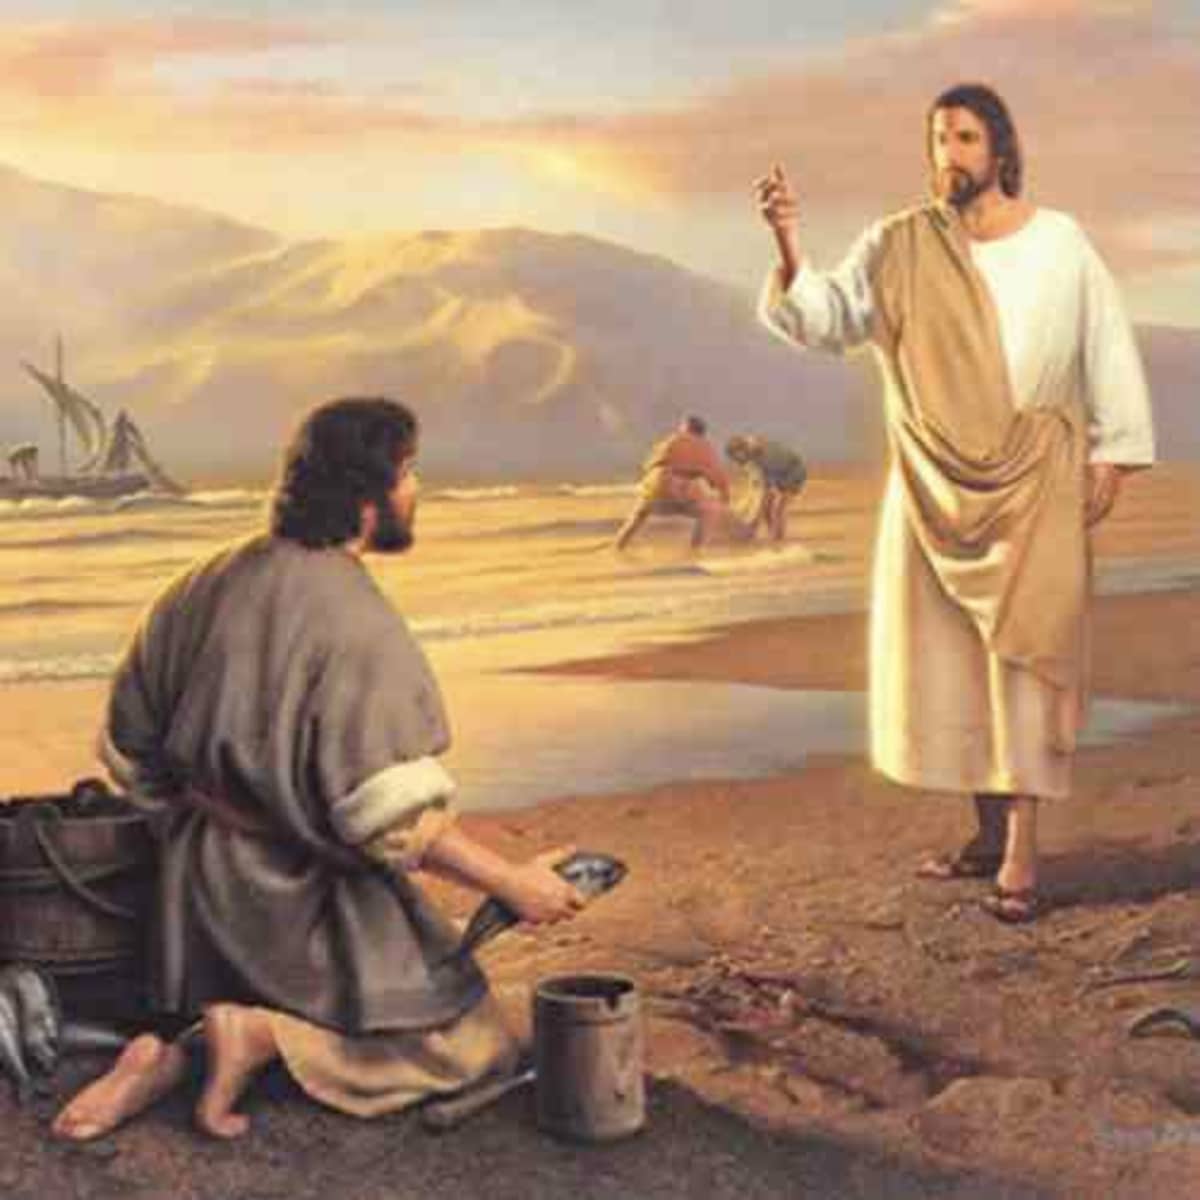 All About Peter: A Disciple of Jesus - HubPages